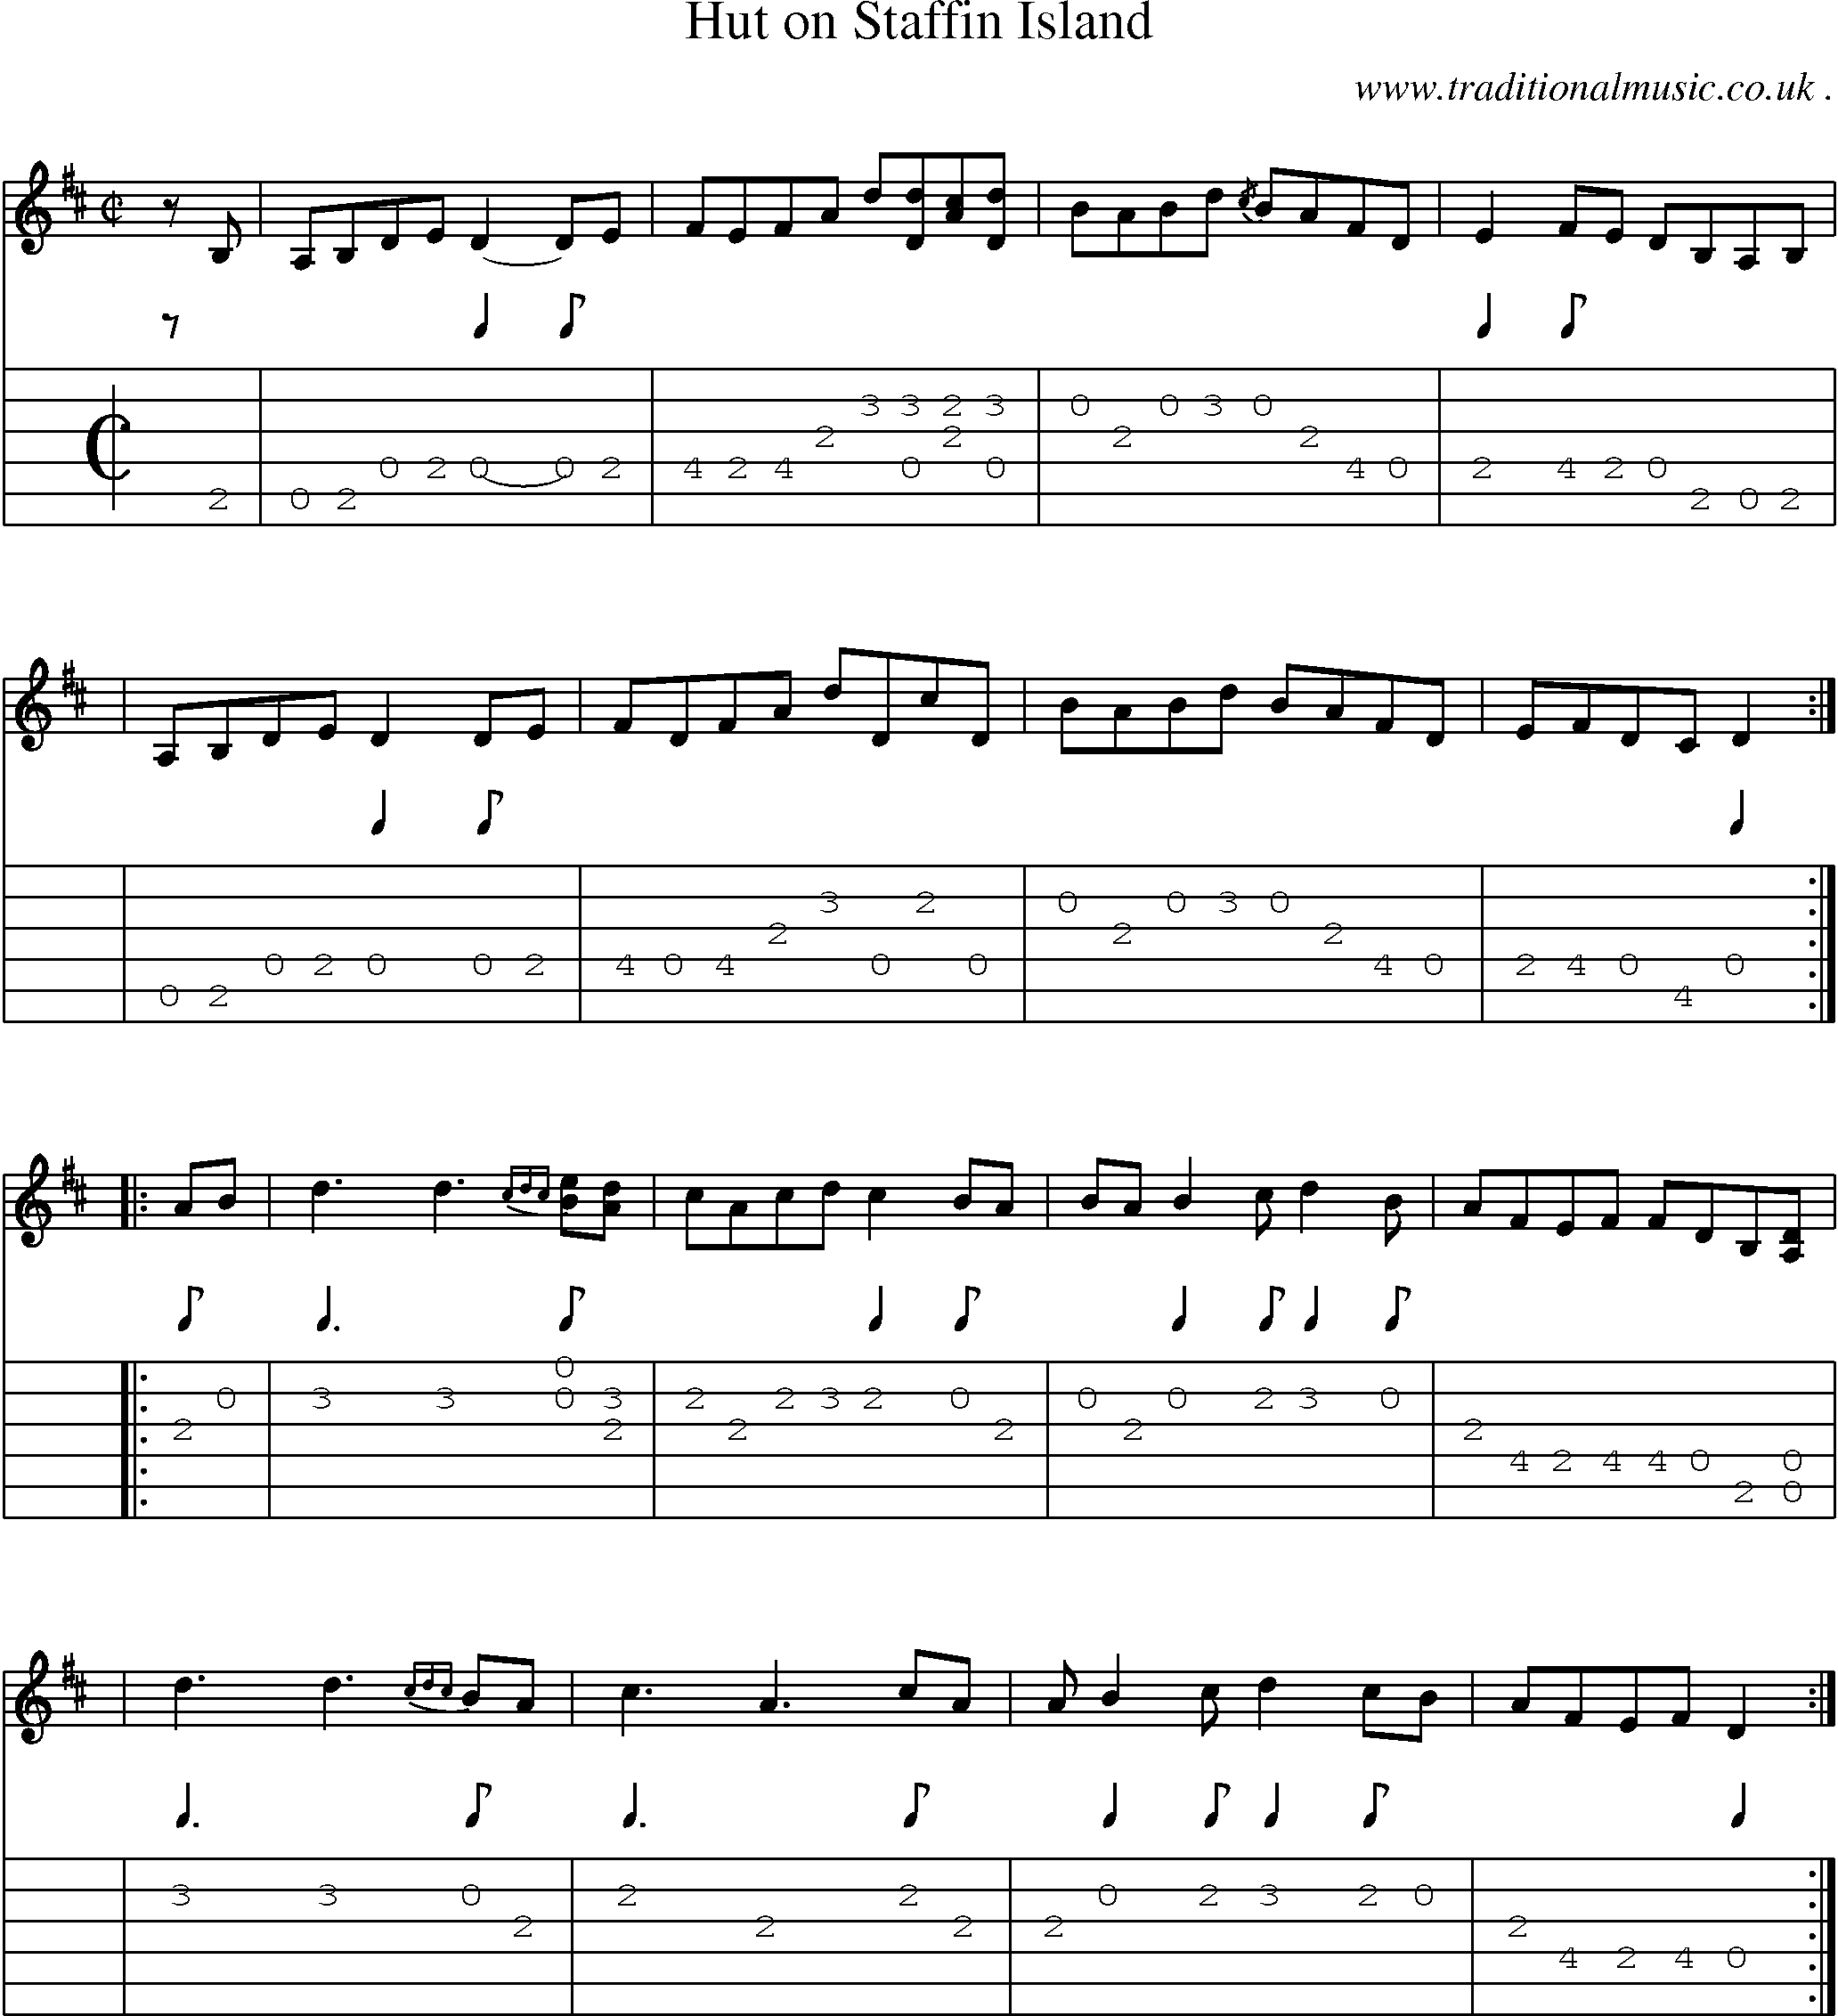 Music Score and Guitar Tabs for Hut On Staffin Island